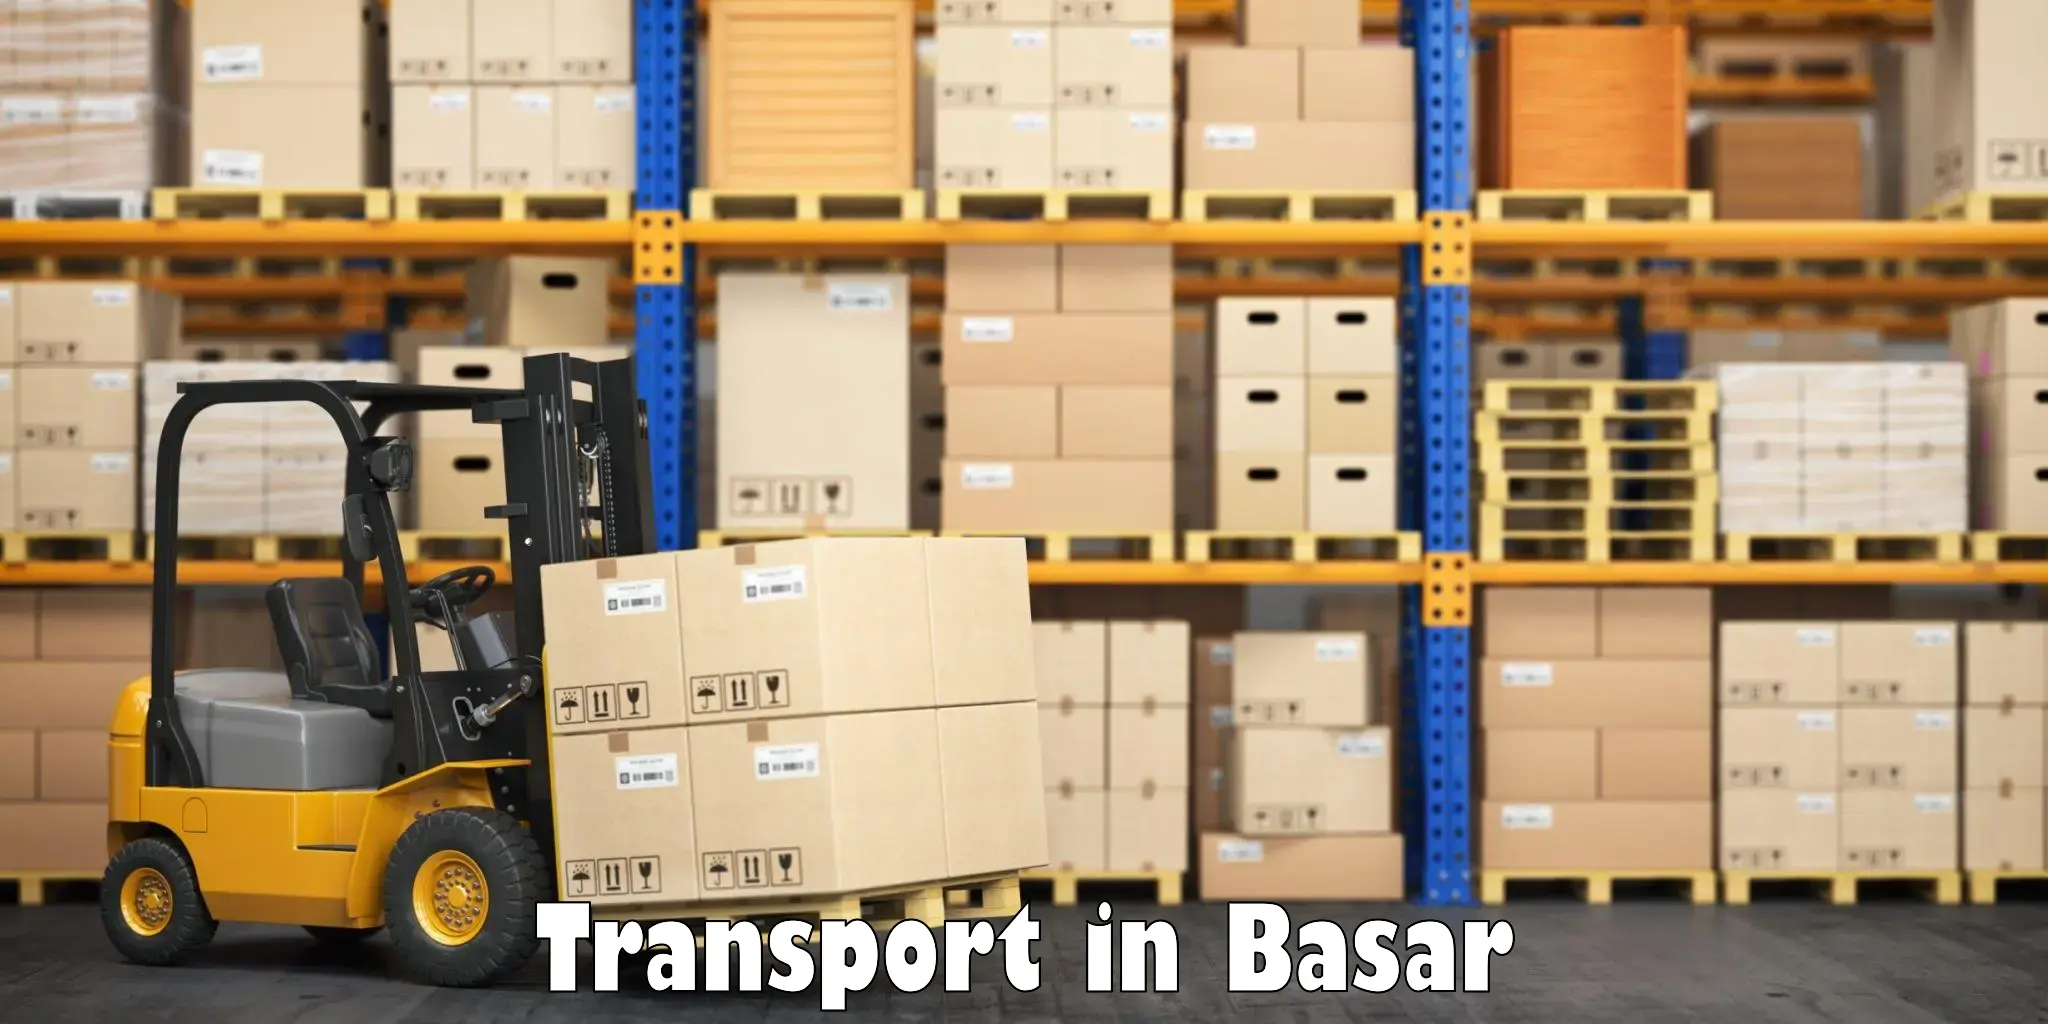 Daily parcel service transport in Basar